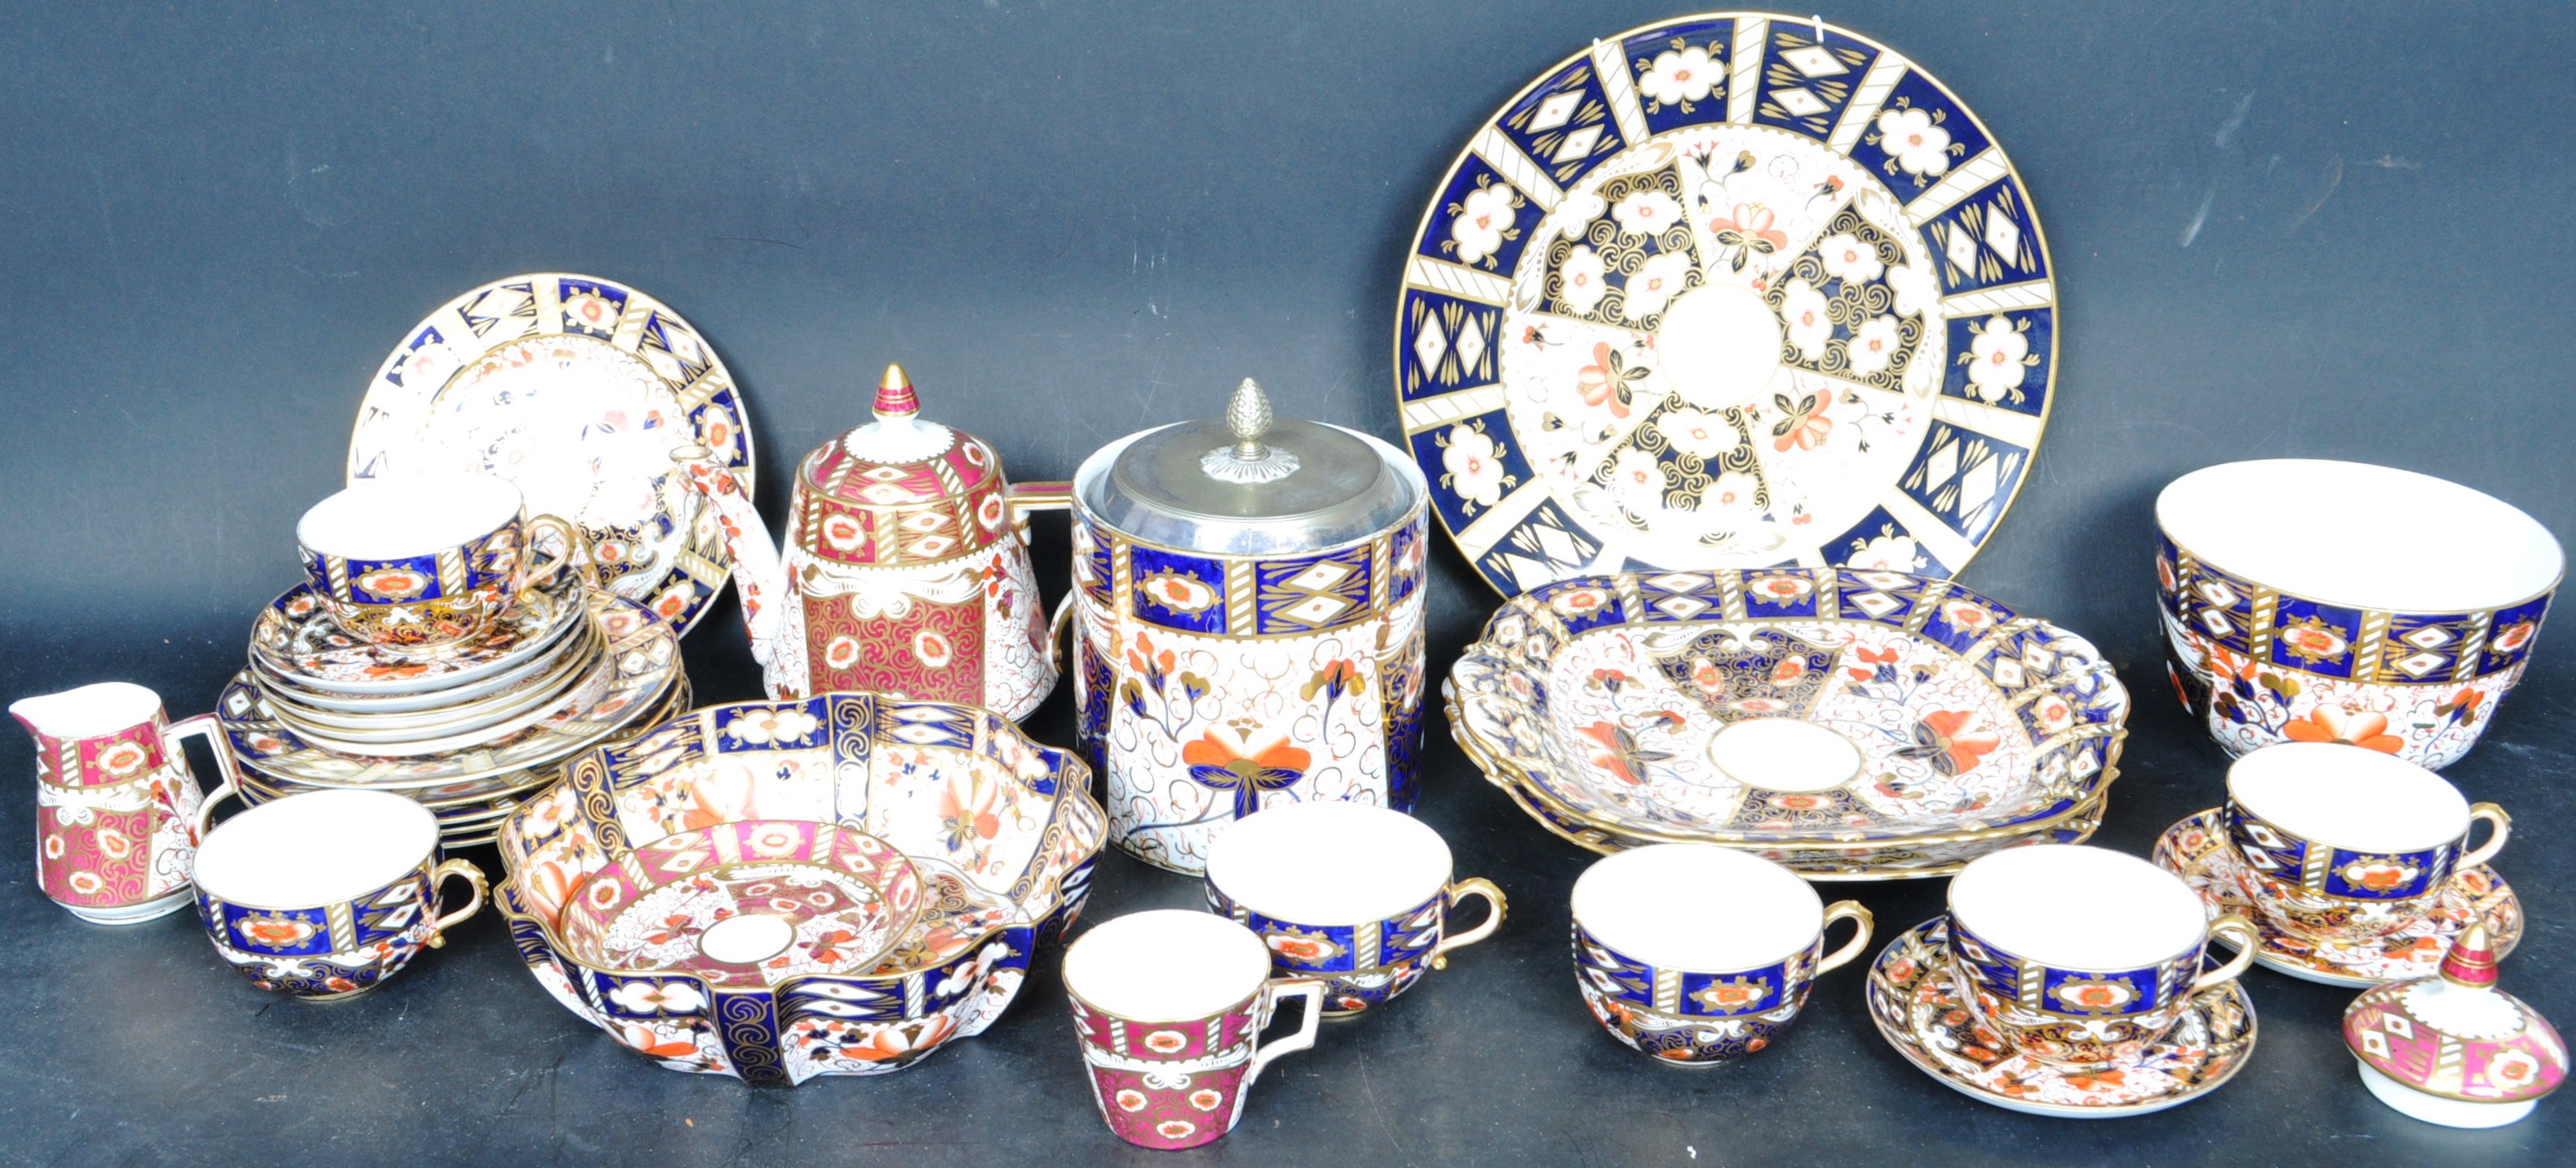 COLLECTION OF VINTAGE 20TH CENTURY ROYQL CROWN DERBY IMARI PATTERN CHINA AND MORE